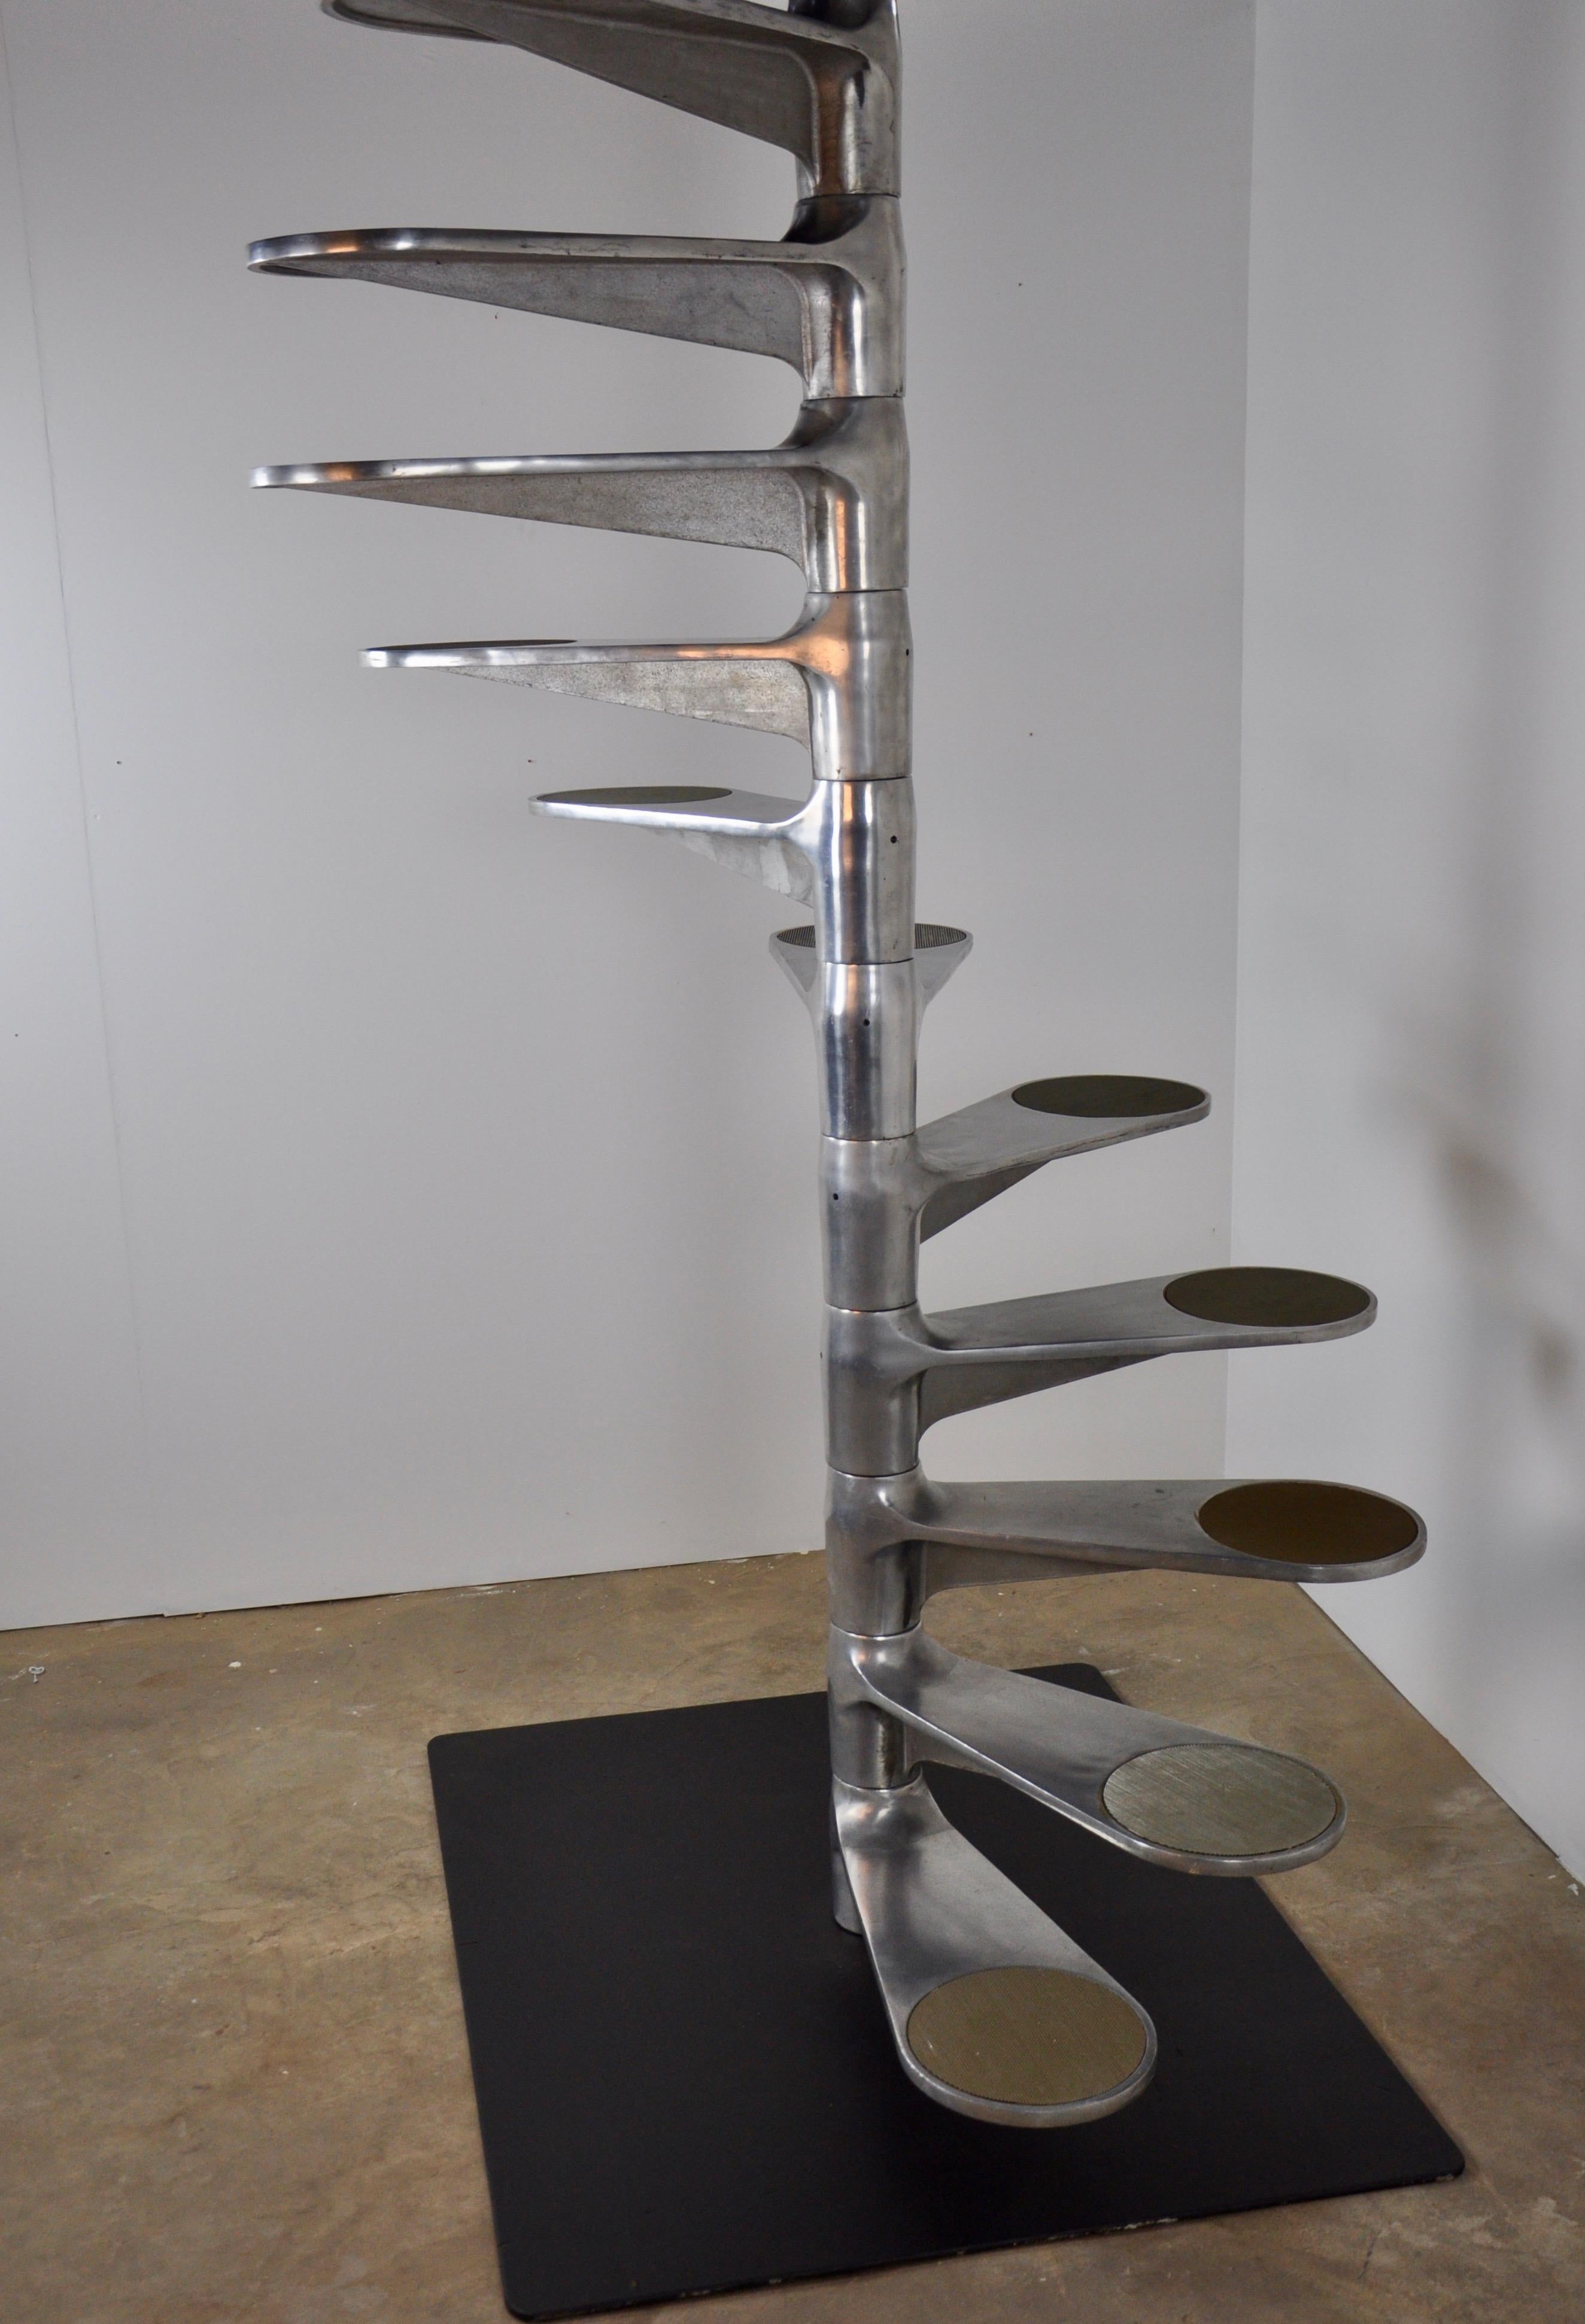 Helical staircase by Roger Tallon for Galerie Lacloche, 1980 composed of 19 steps step height 20cm x 70cm total length 380cm.